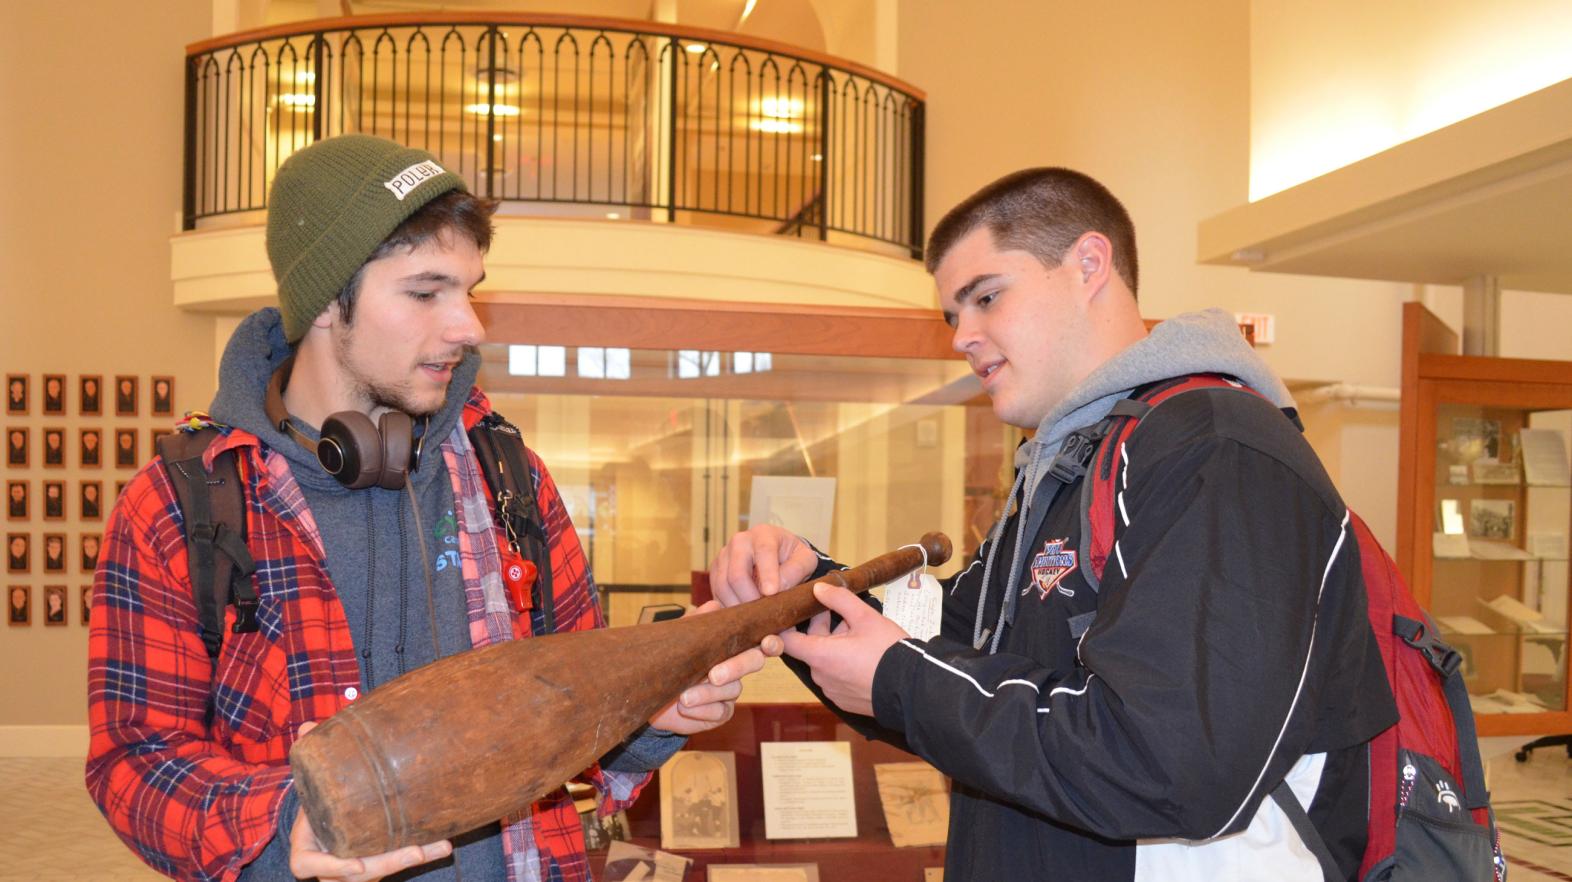 Two students examine a historic piece of pottery in the Springfield College experience.